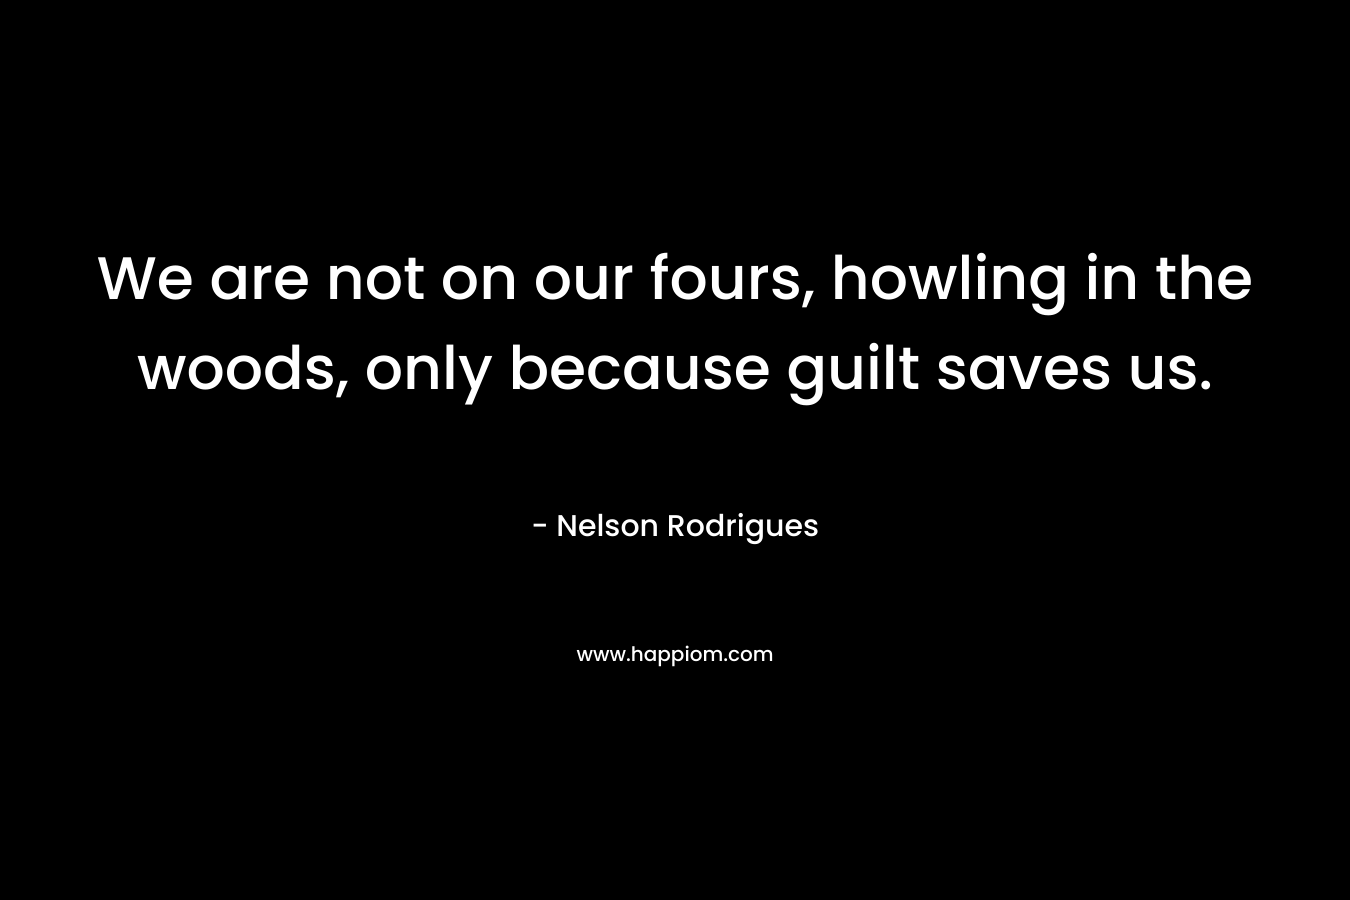 We are not on our fours, howling in the woods, only because guilt saves us. – Nelson Rodrigues